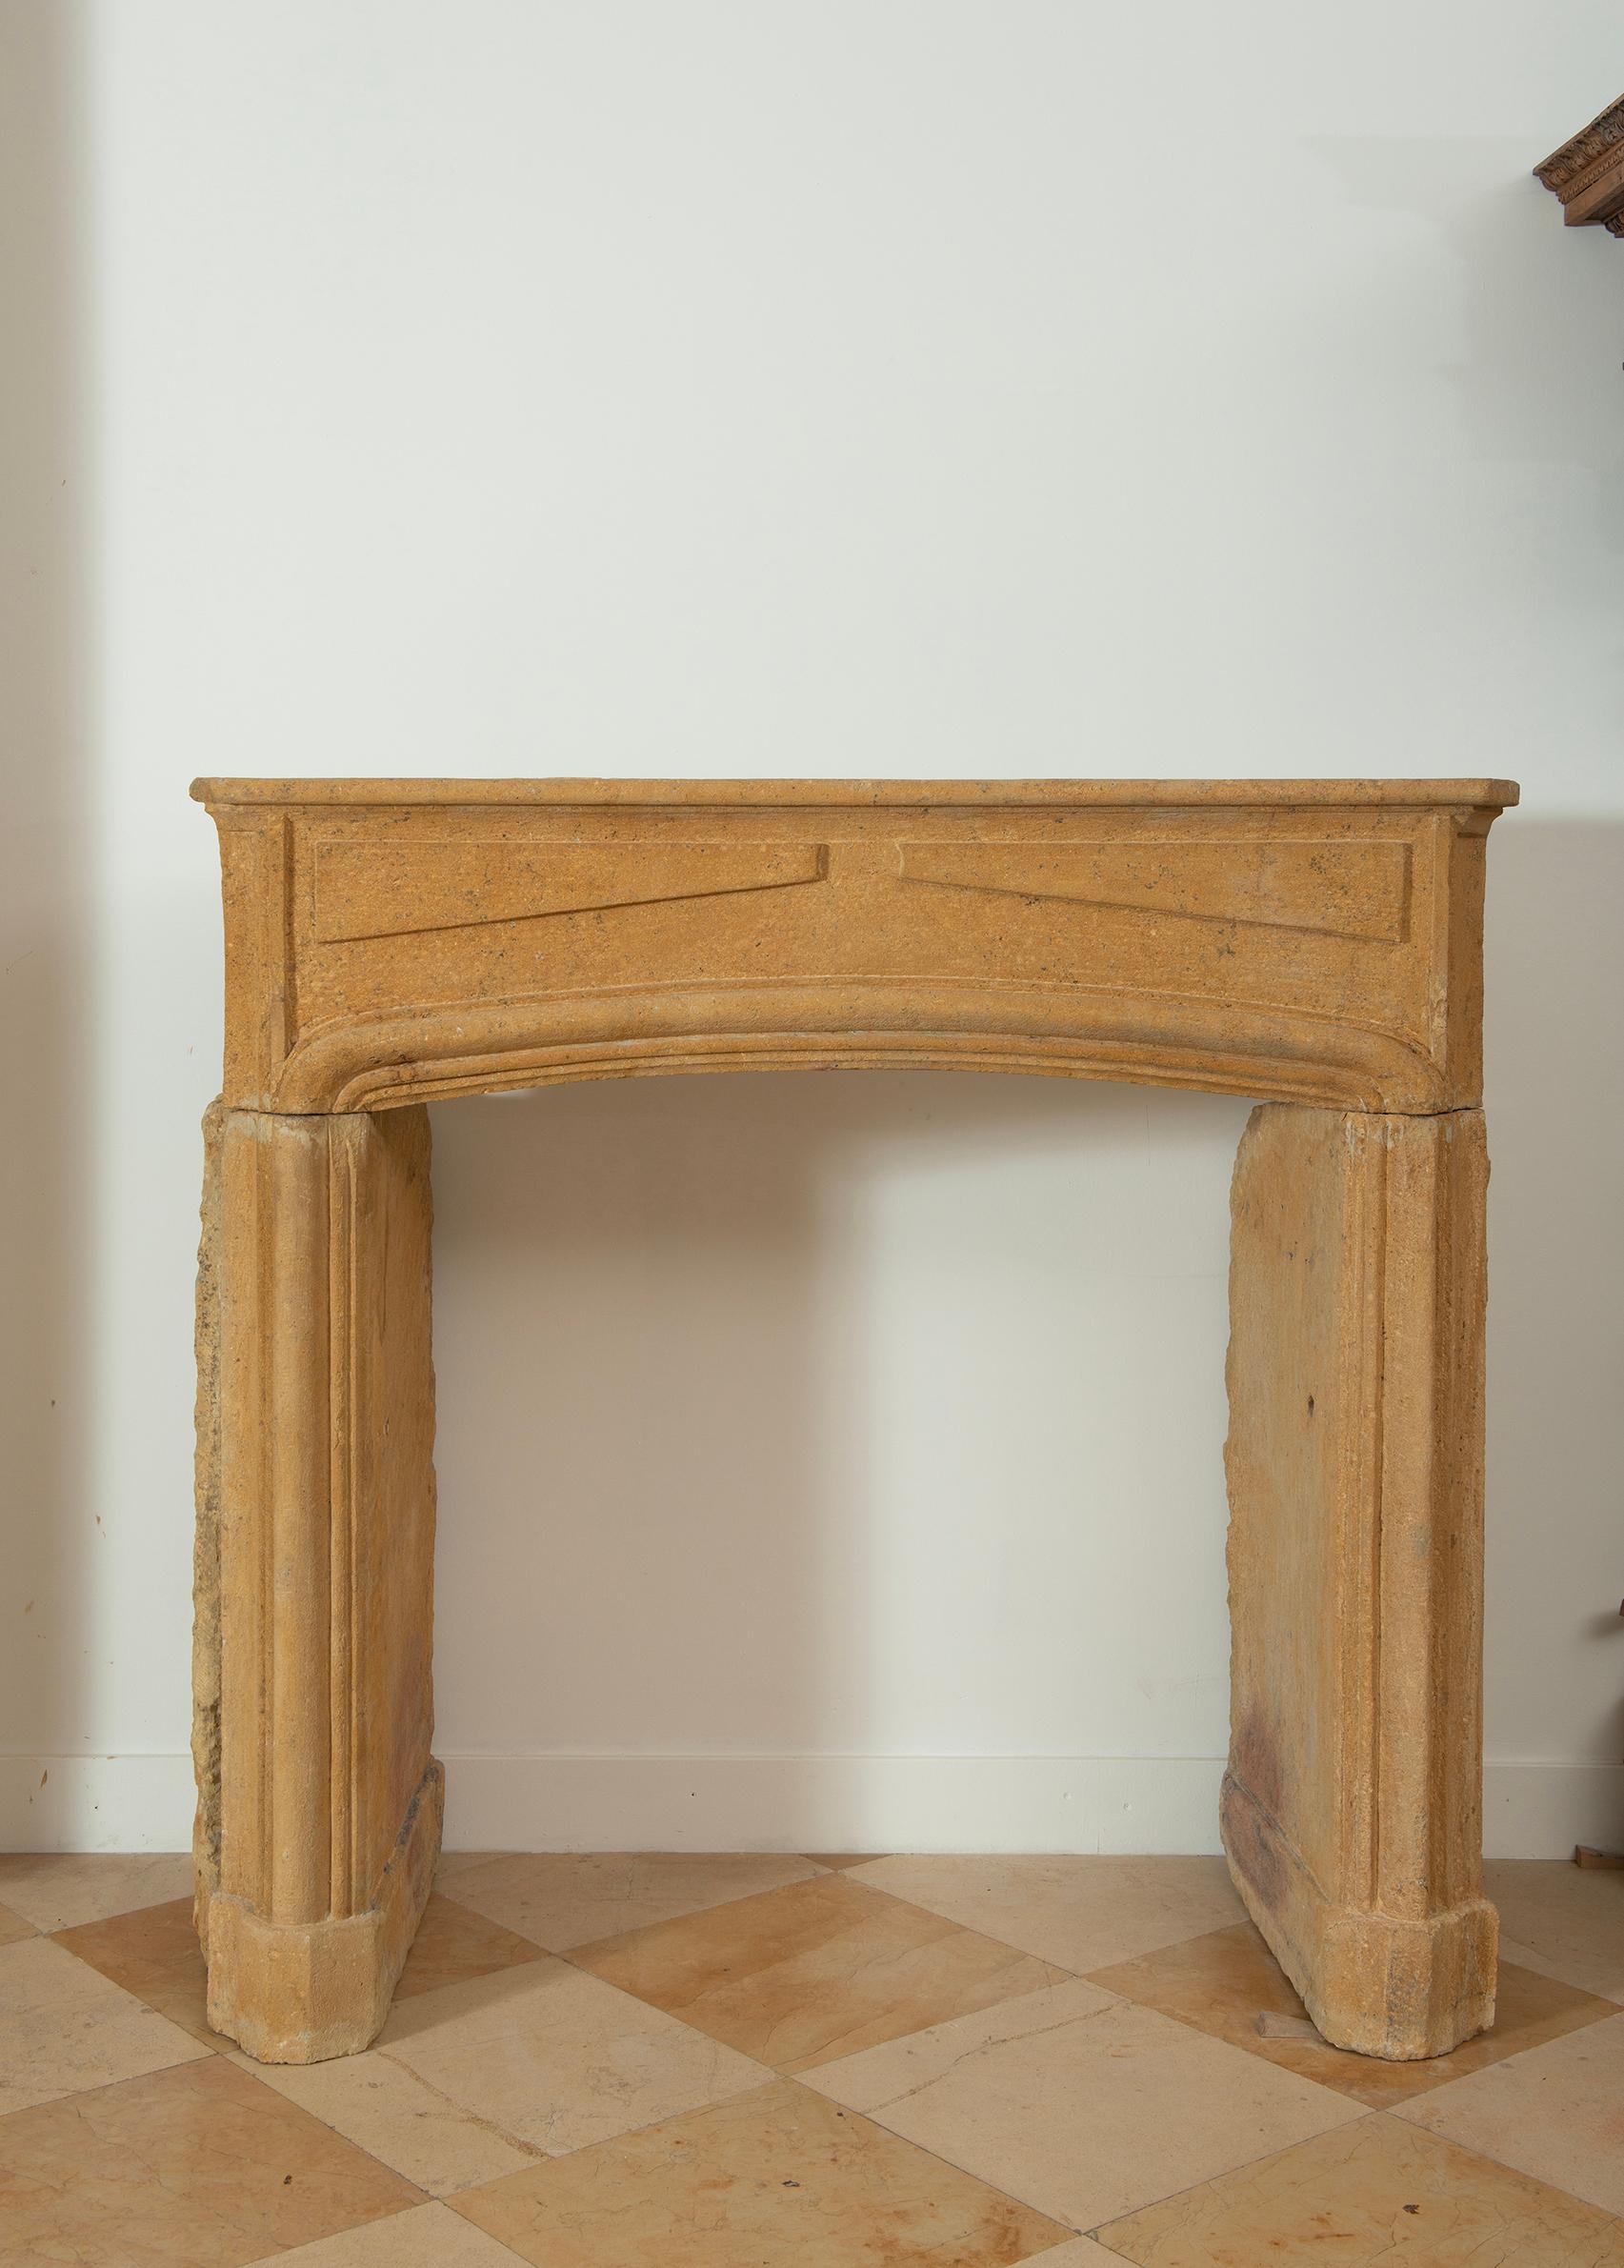 Original 18th century Louis XIV fireplace mantel from France.

Opening measurements: 39.7 x 38.1 inch (height x width).

Unrestored condition, nice patina, ready to be shipped and installed.